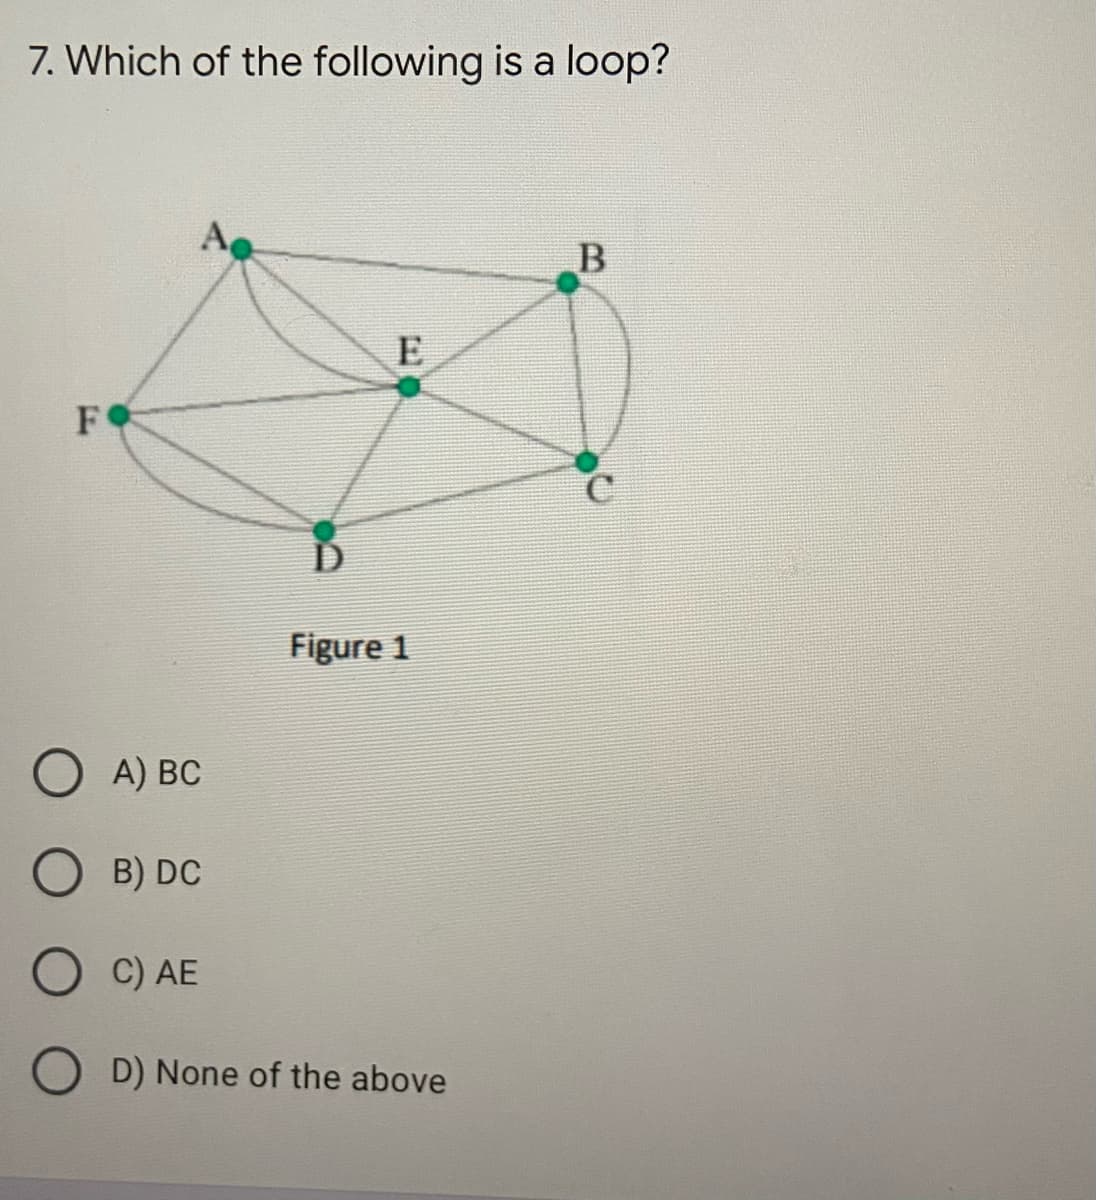 7. Which of the following is a loop?
A
B
E
F
Figure 1
A) ВС
B) DC
C) AE
D) None of the above
